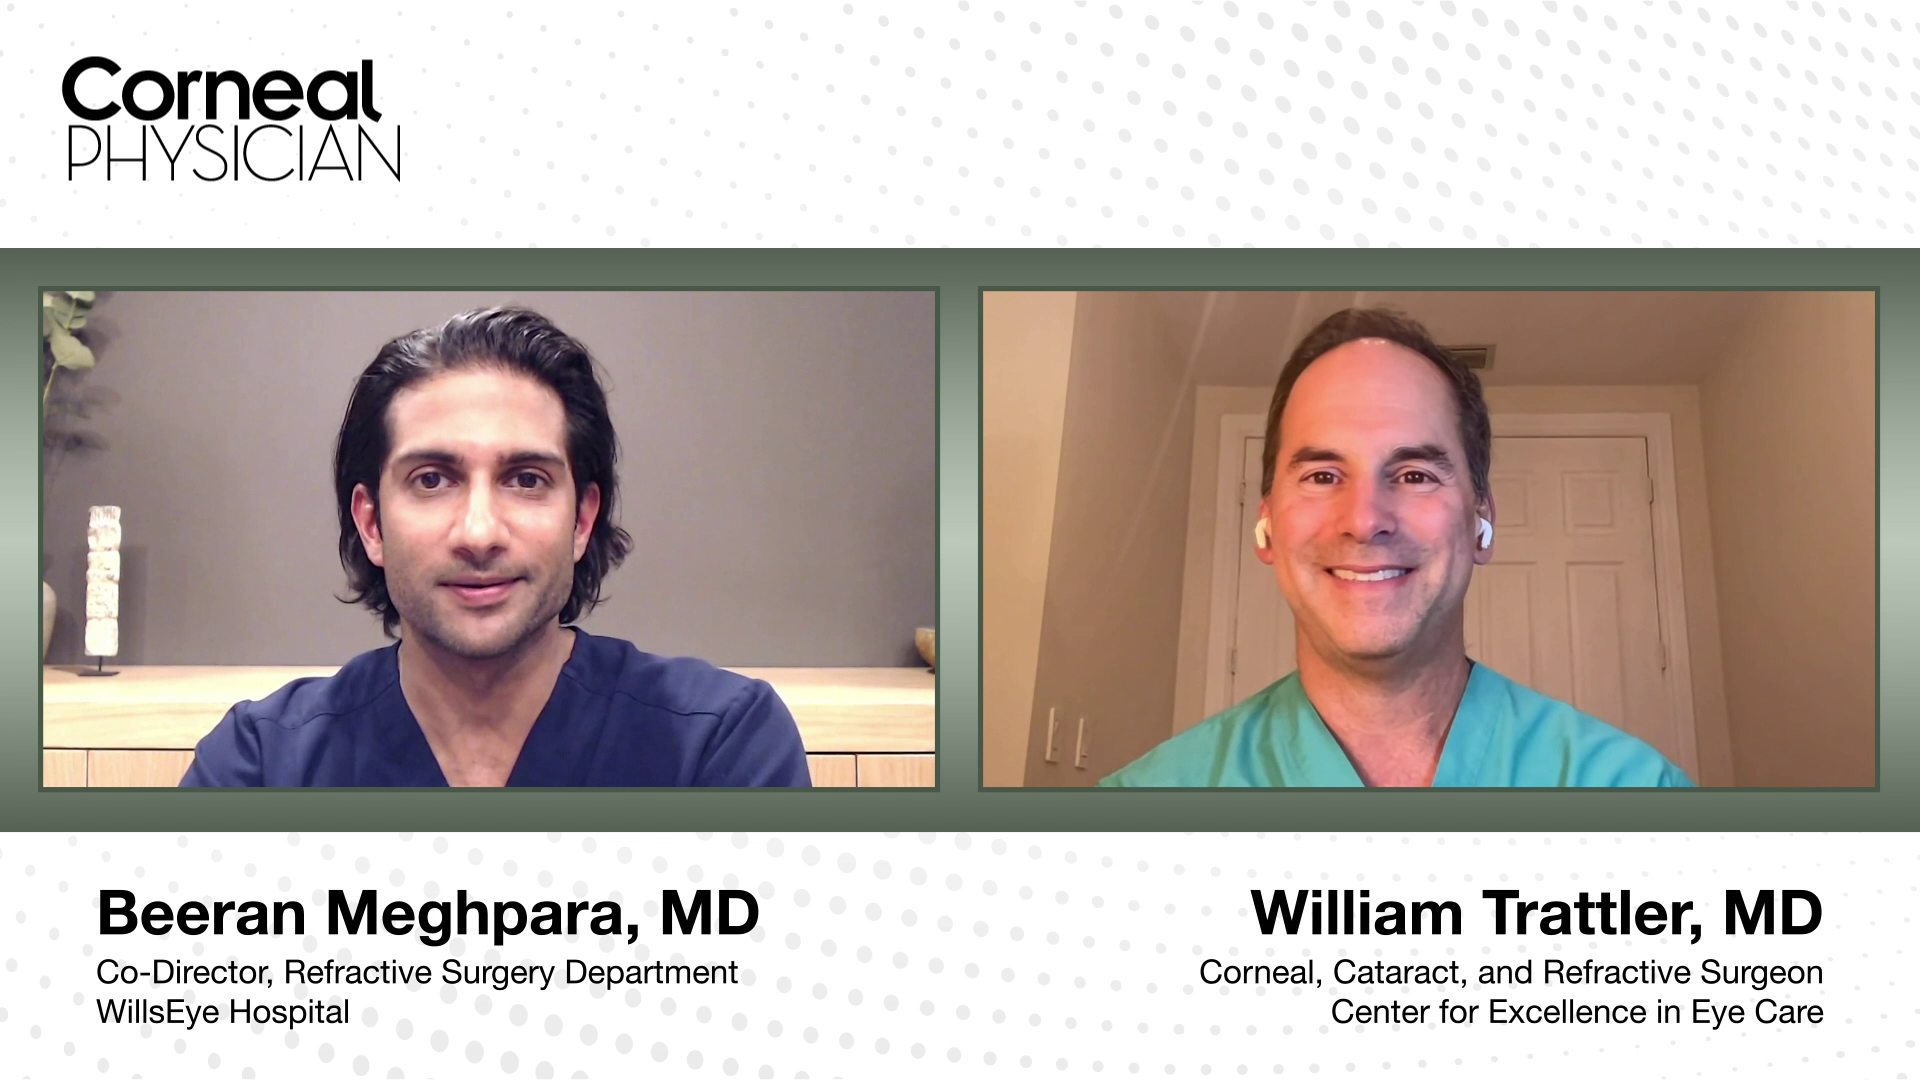 Part 22: Beeran Meghpara, MD, and William Trattler, MD, discus keratoconus treatments as patients progress in age.